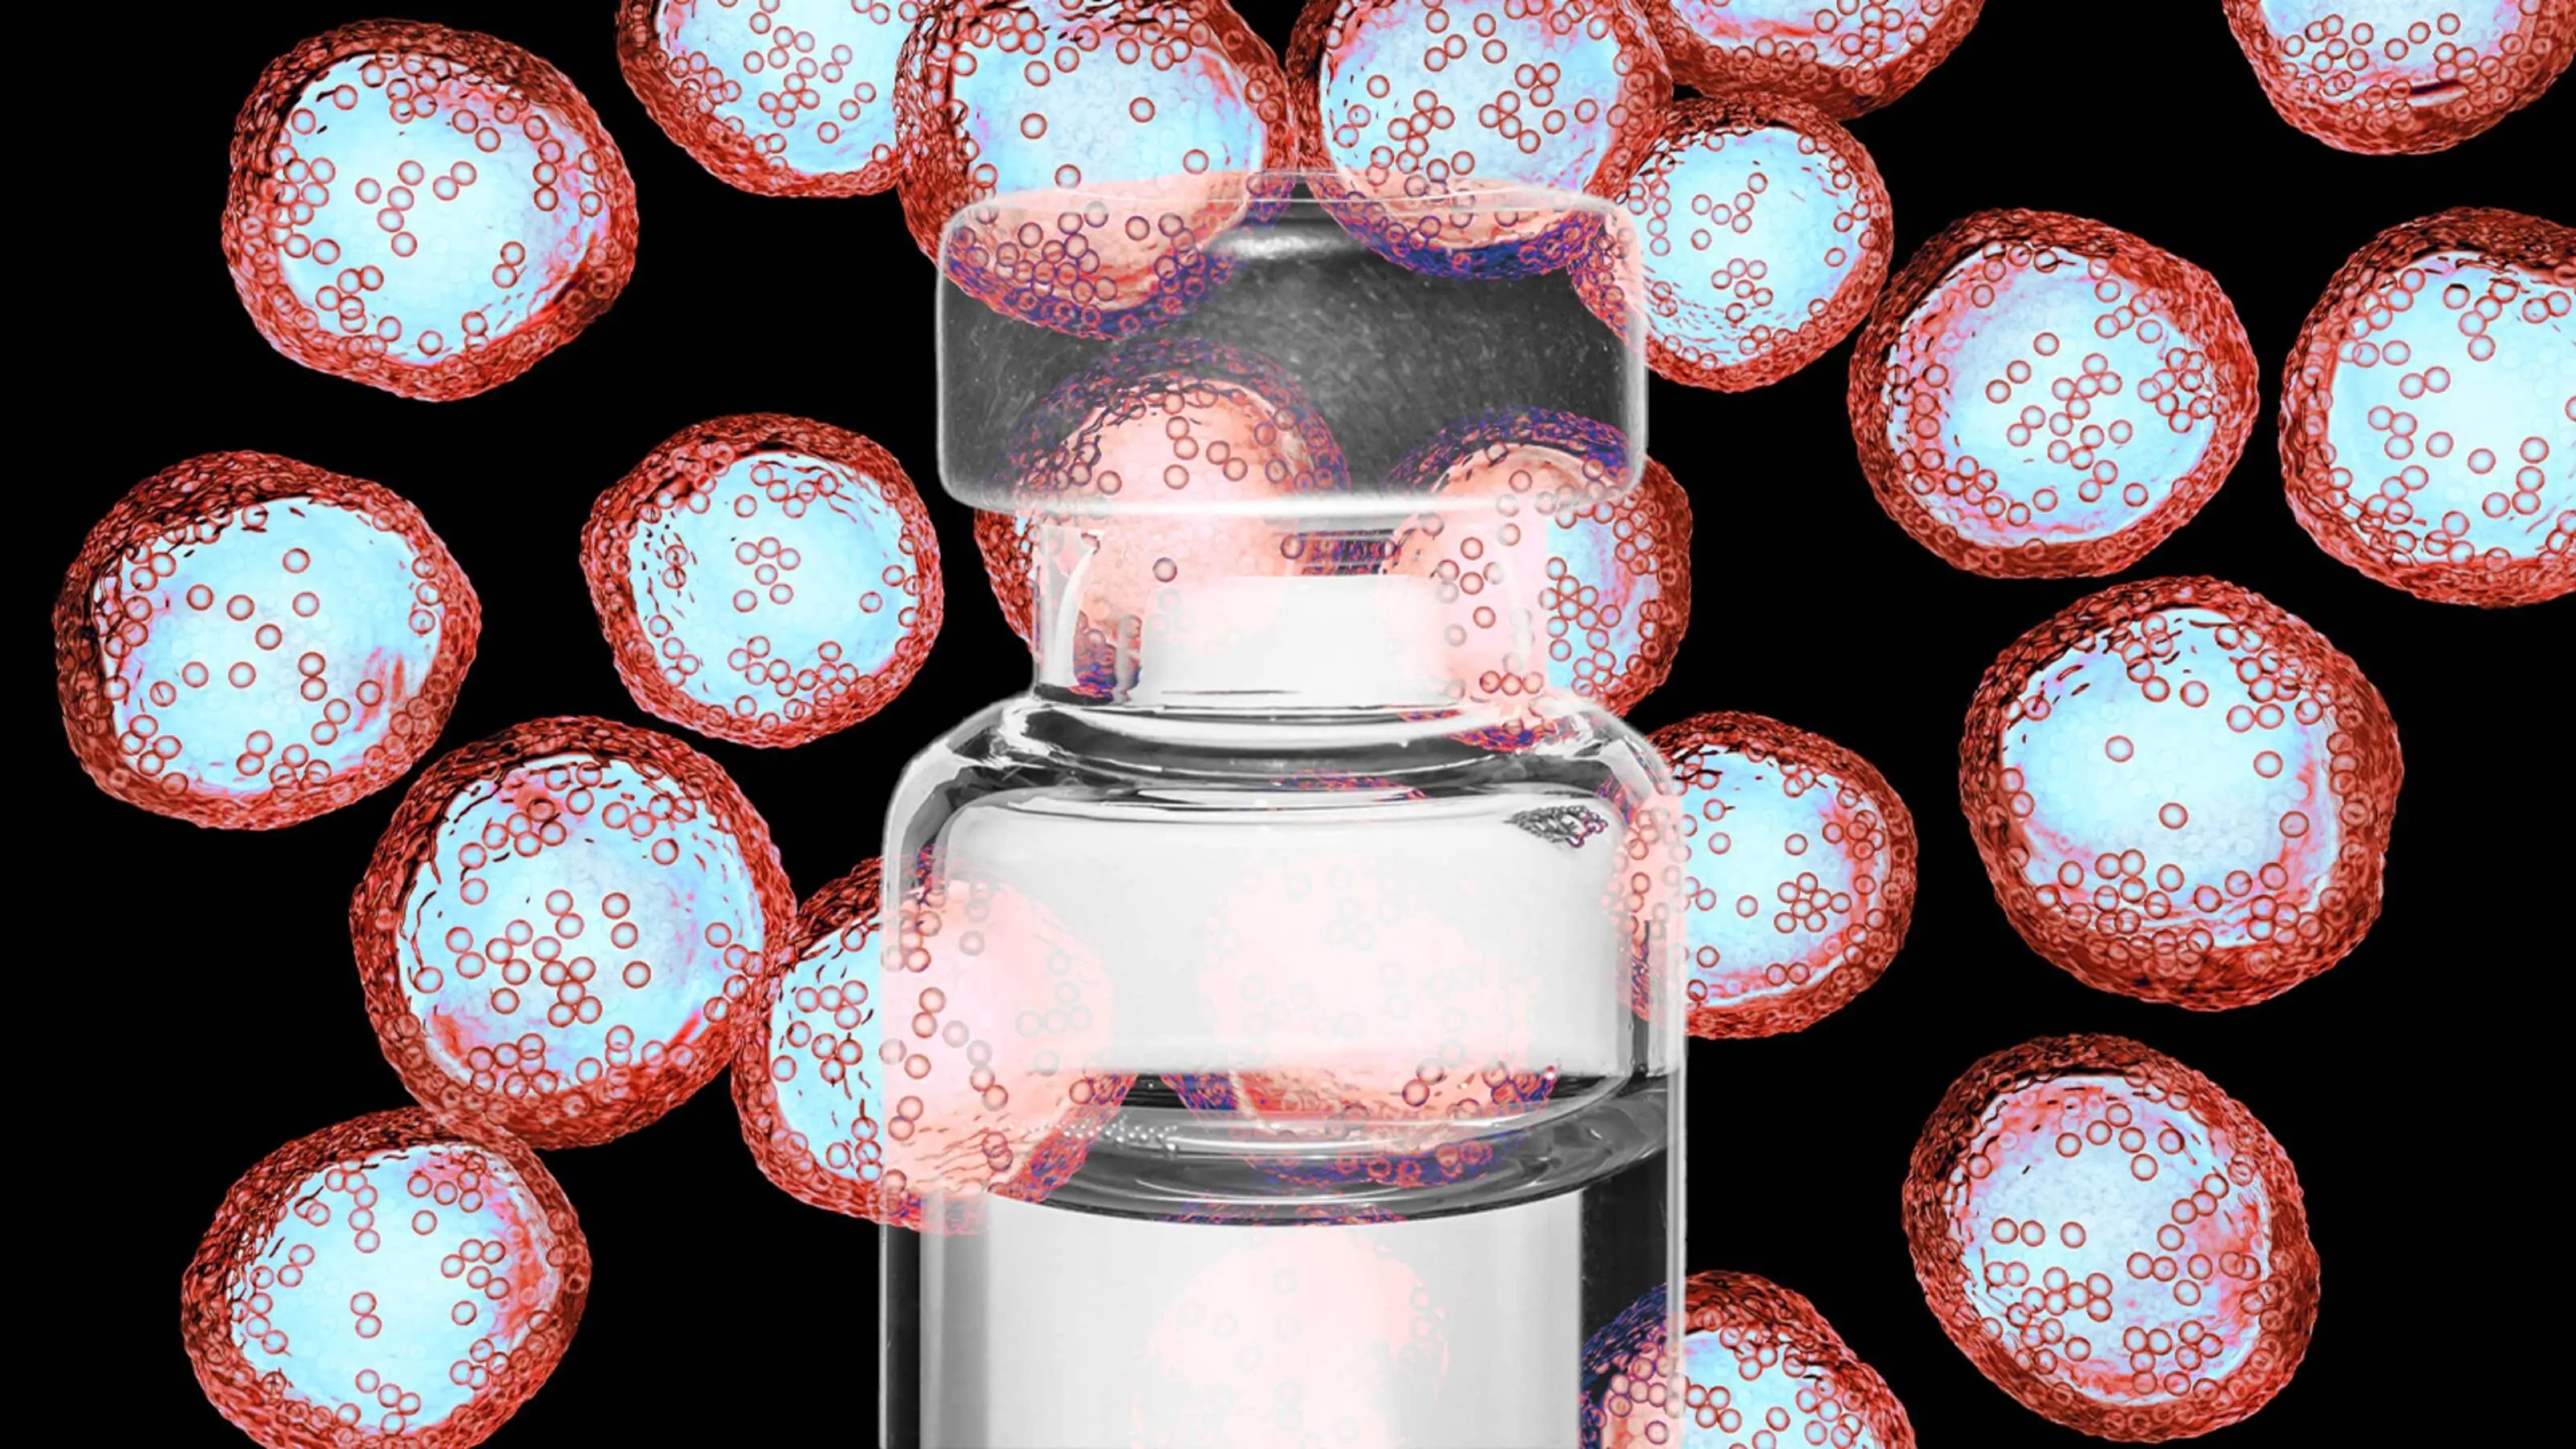 Transparent perfume bottle surrounded by floating pink spheres with intricate patterns on a dark background.